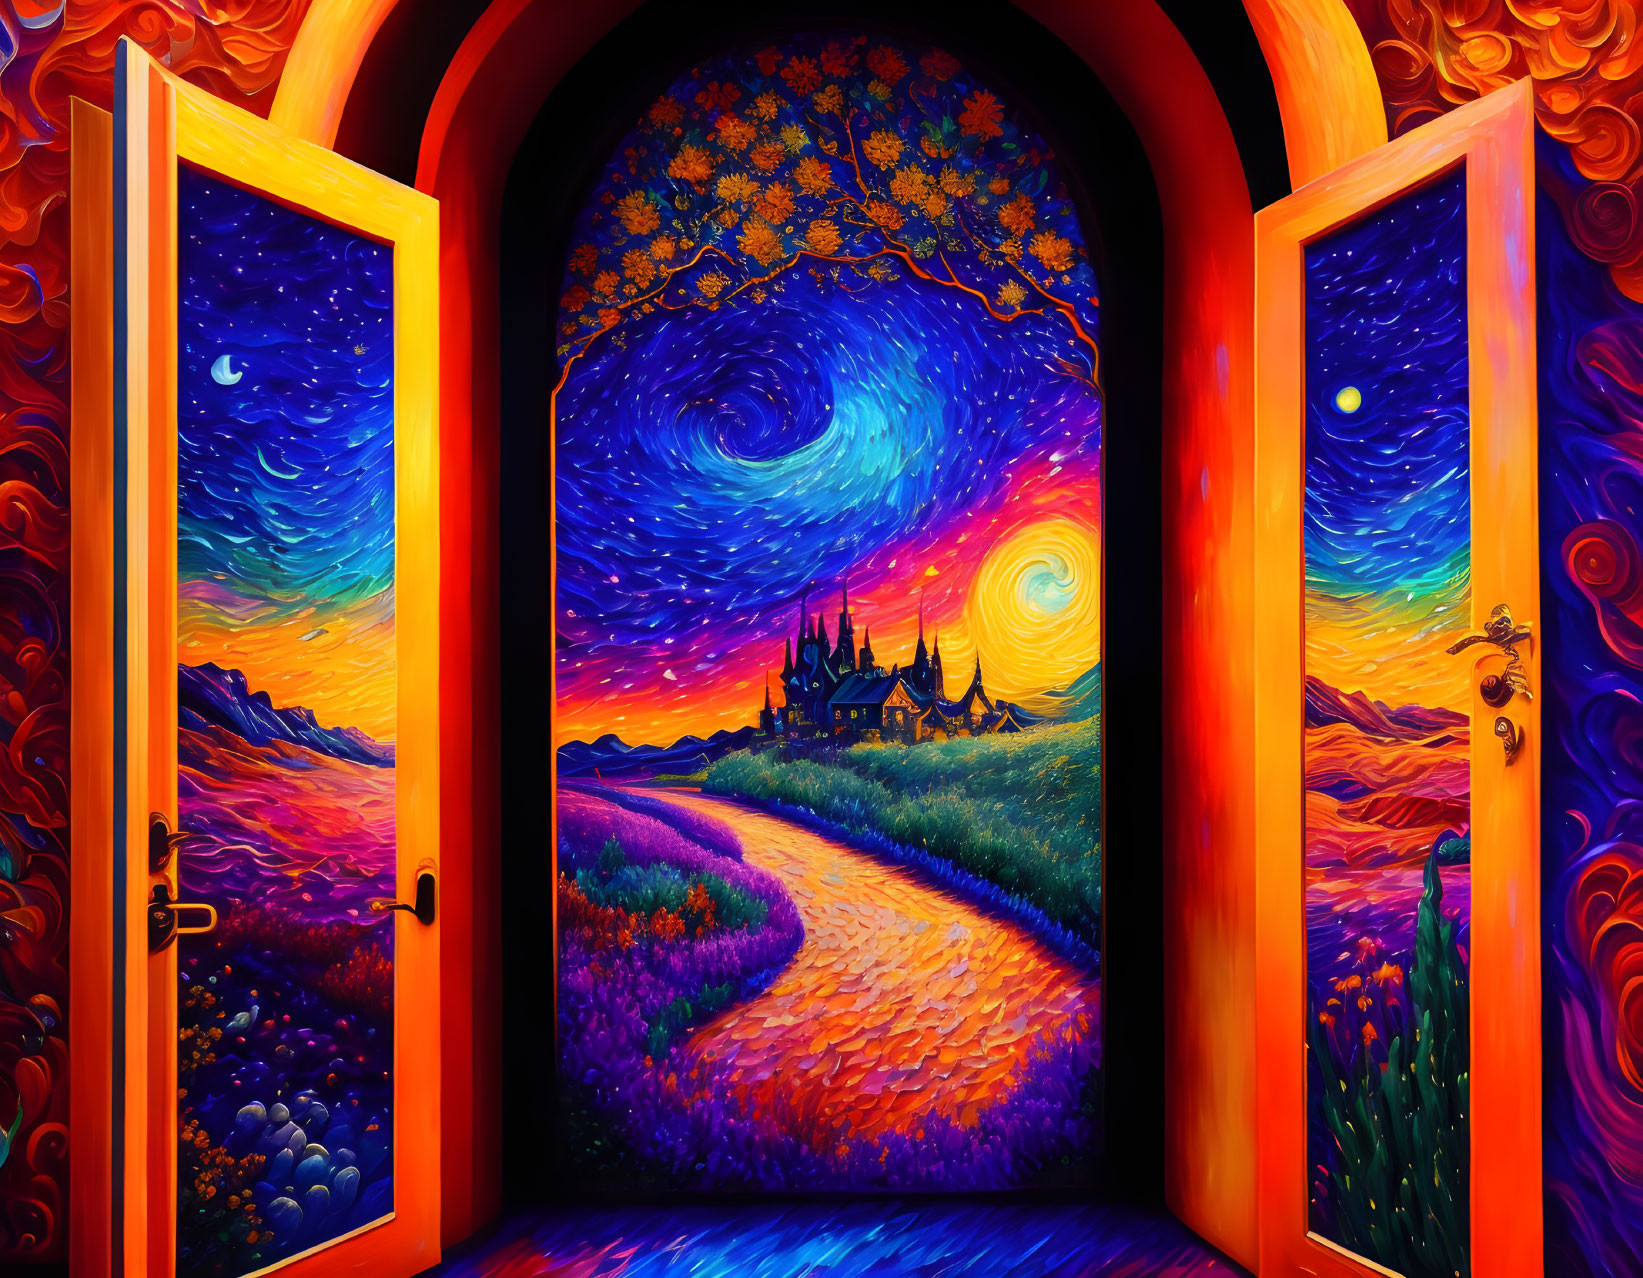 A magical Doorway leading to Another World